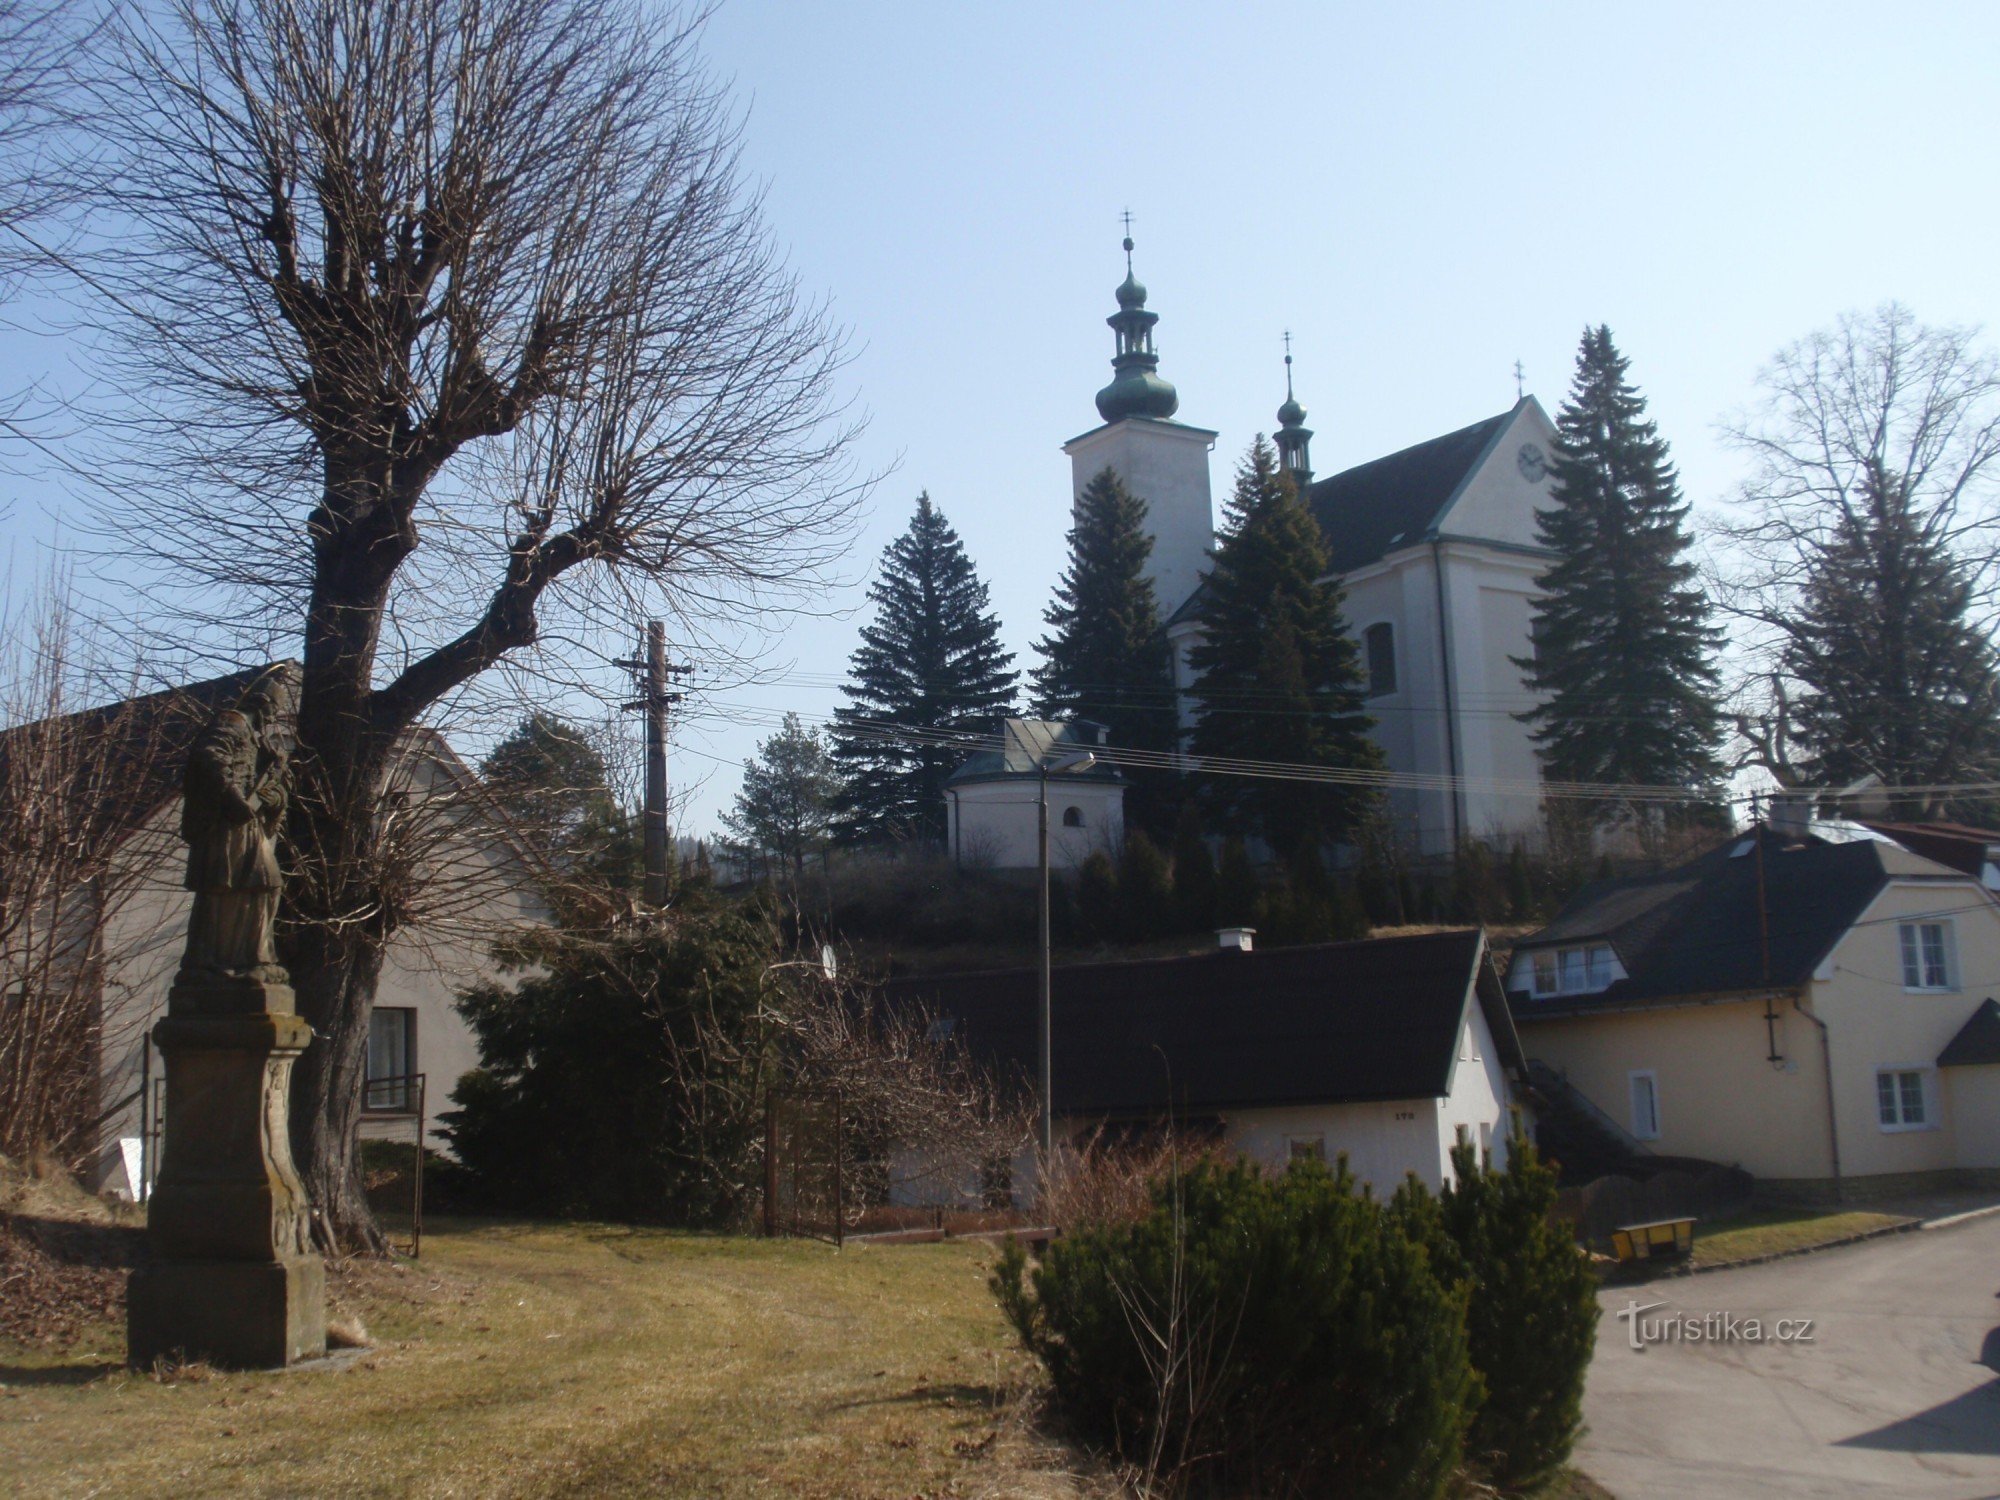 Sights and attractions of the village of Řetová